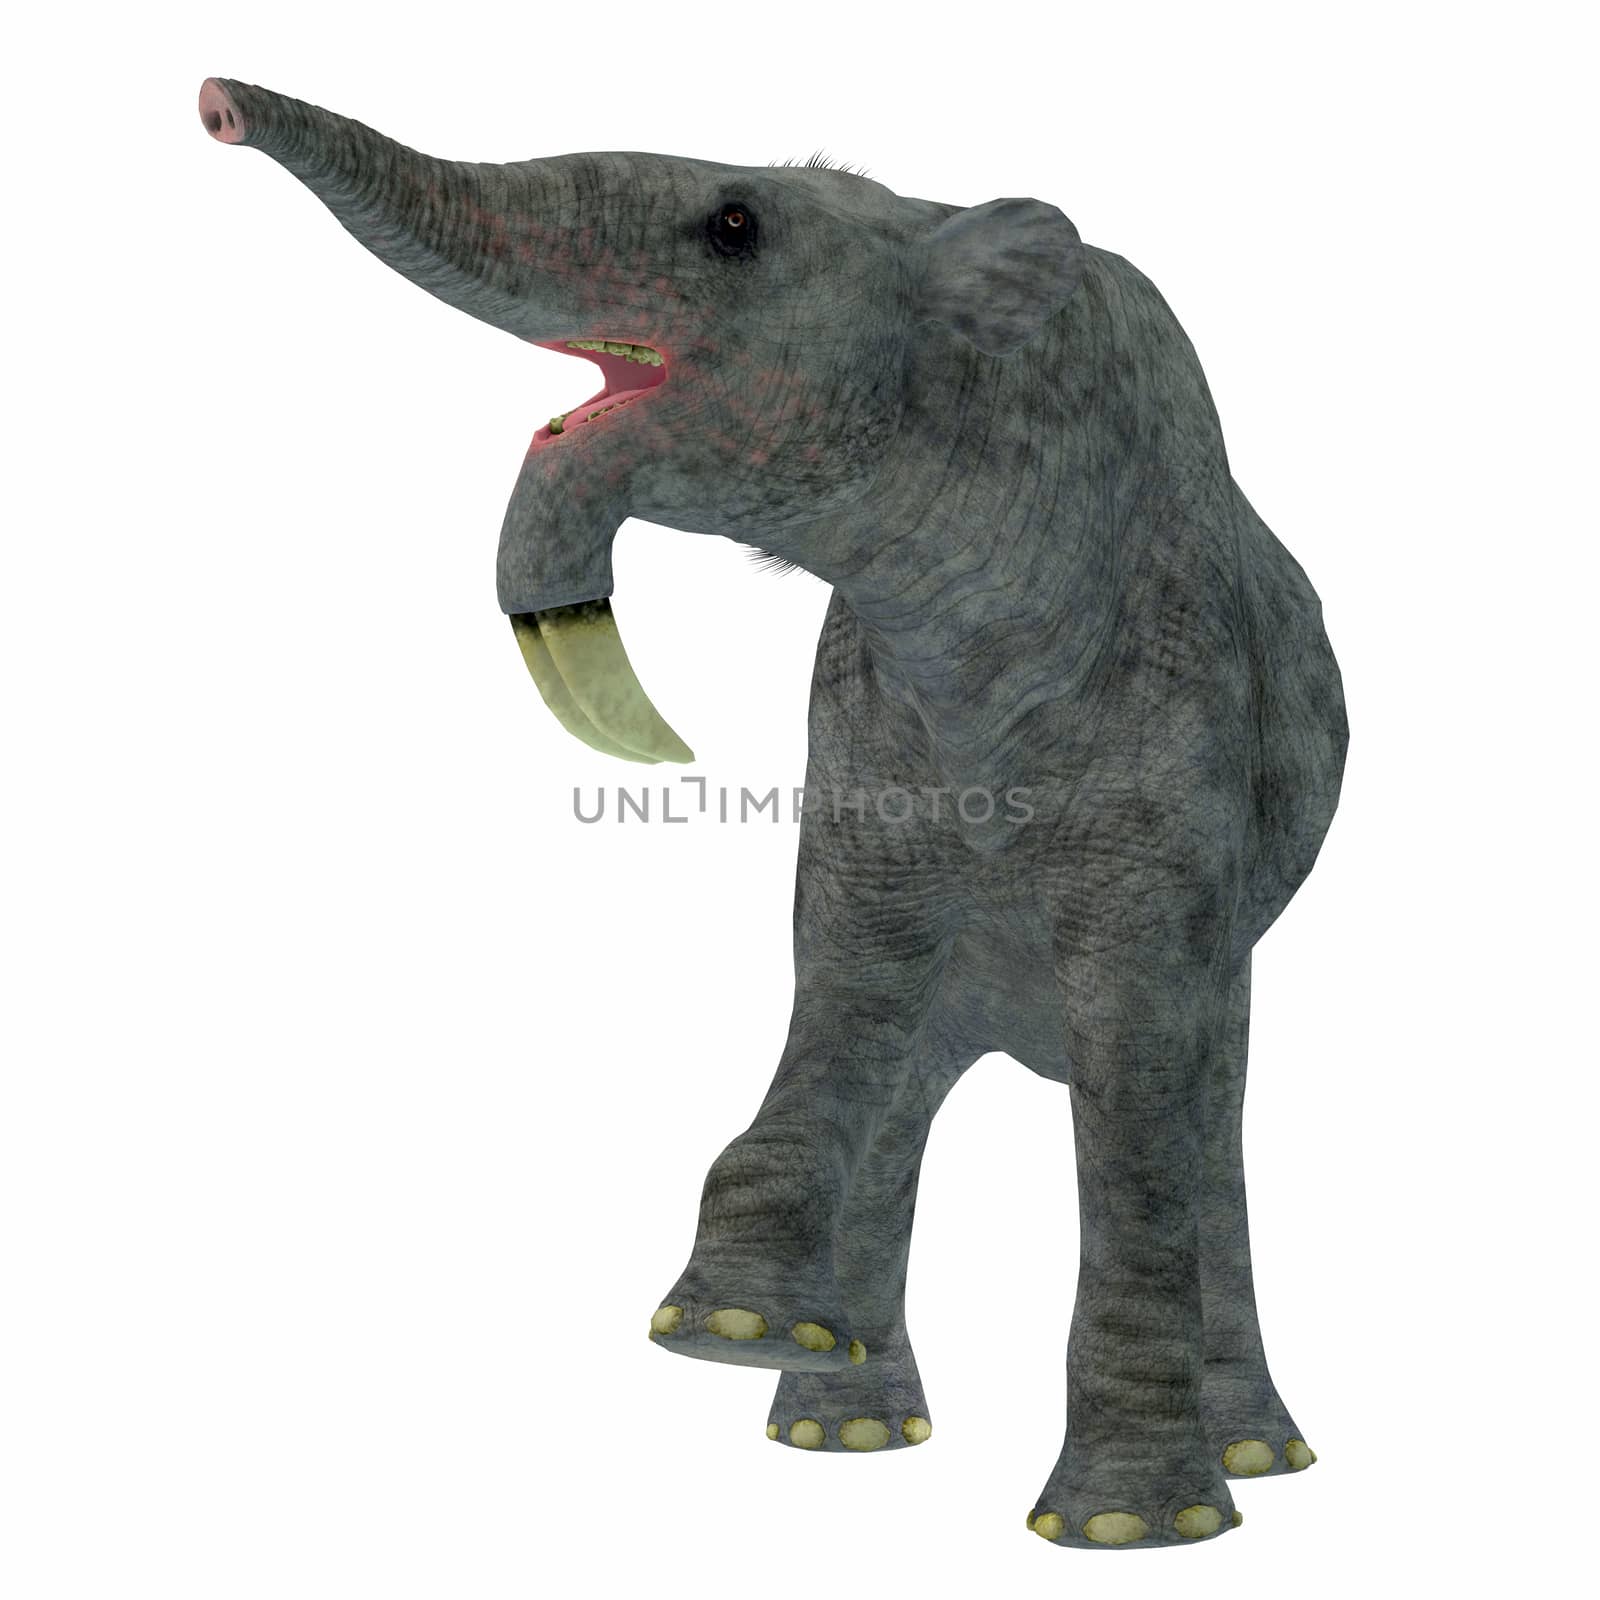 Deinotherium was an enormous land mammal that lived in Asia, Africa and Europe during the Miocene to Pleistocene Periods.